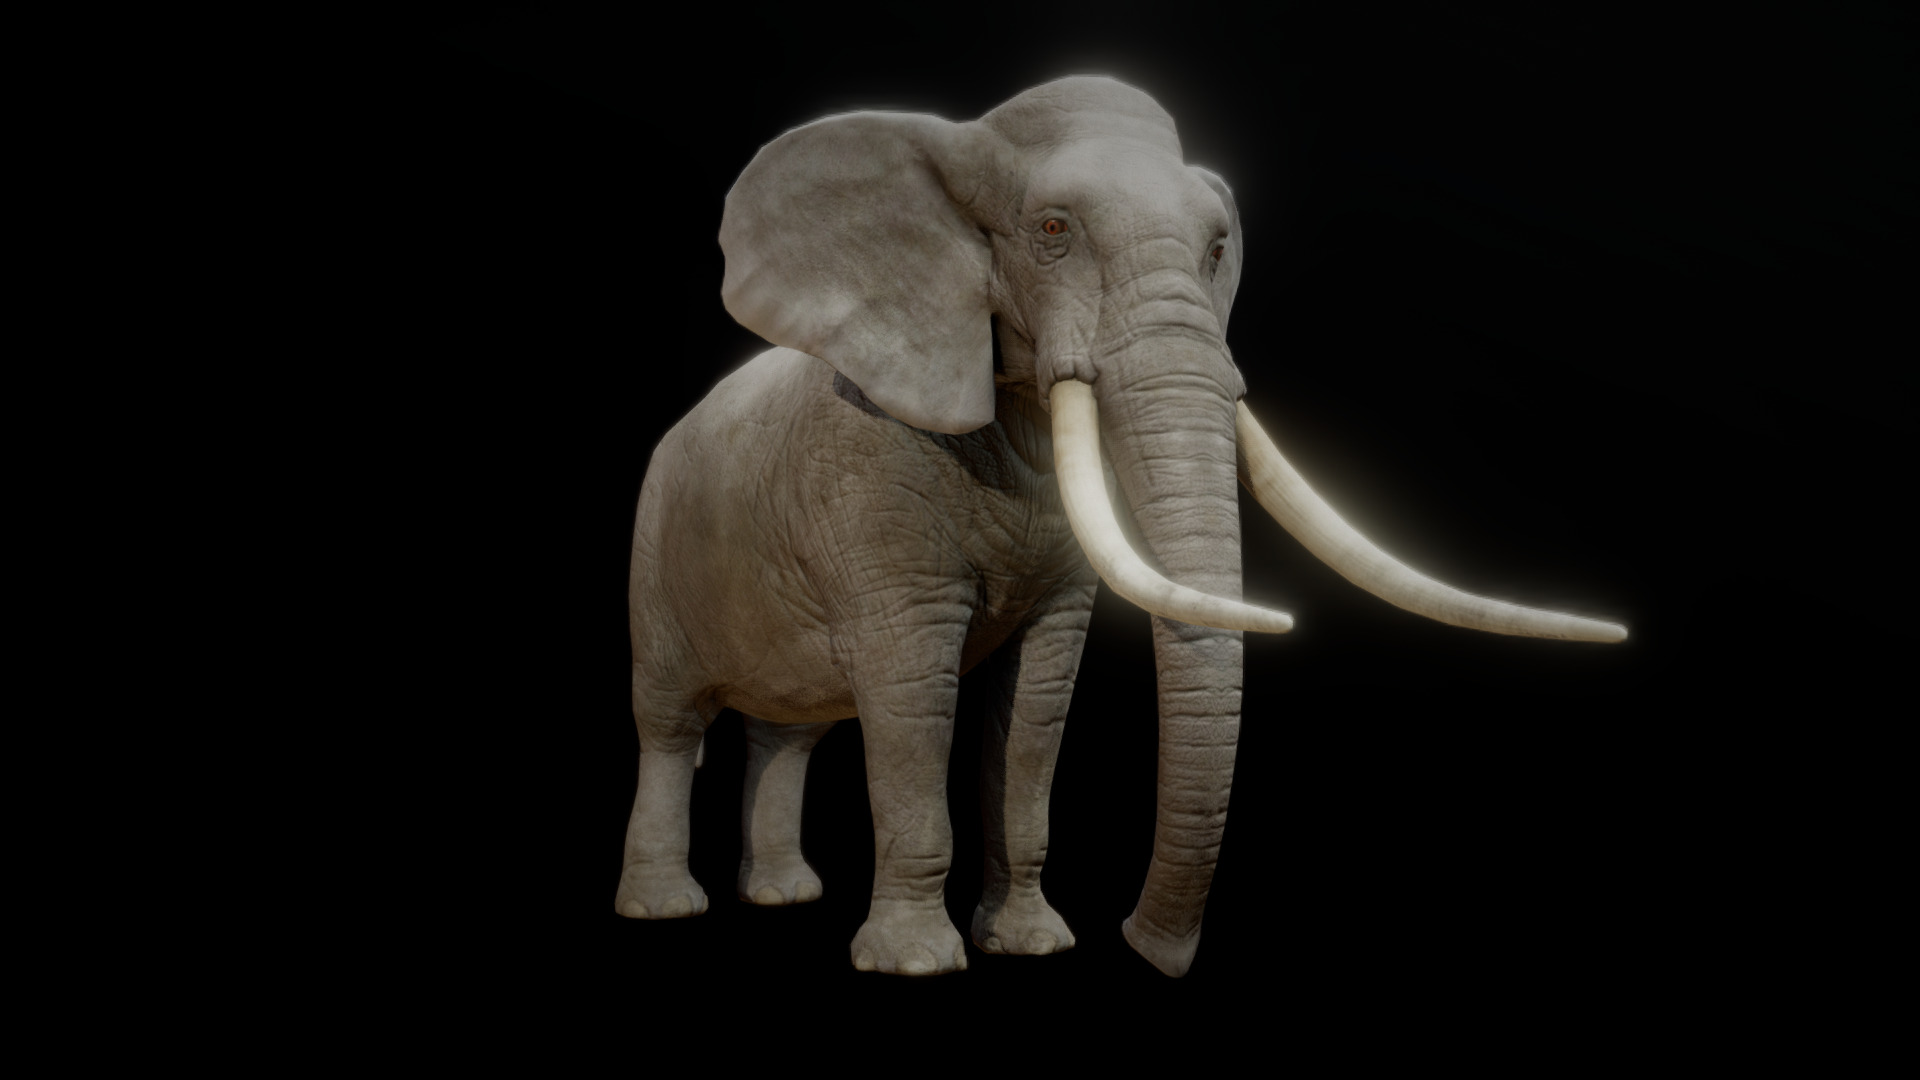 3D model ELEPHANT ANIMATIONS - This is a 3D model of the ELEPHANT ANIMATIONS. The 3D model is about a small elephant with tusks.